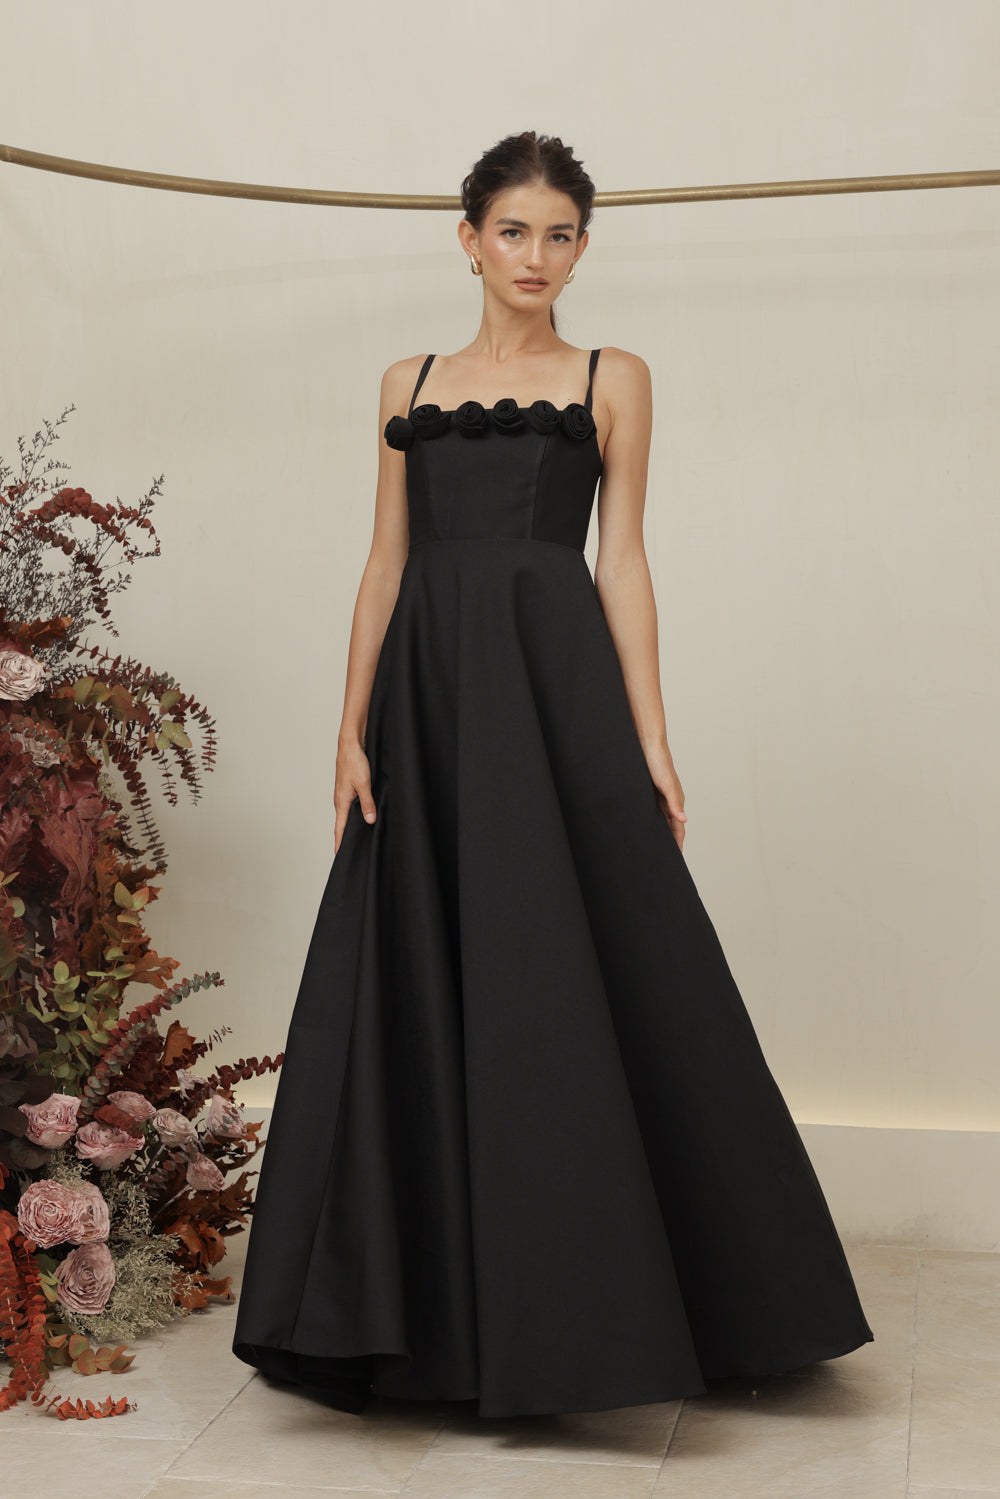 MARCELINE DRESS Straight Neckline Strappy Maxi Gown with Floral Details and Pockets (Black Gazaar)